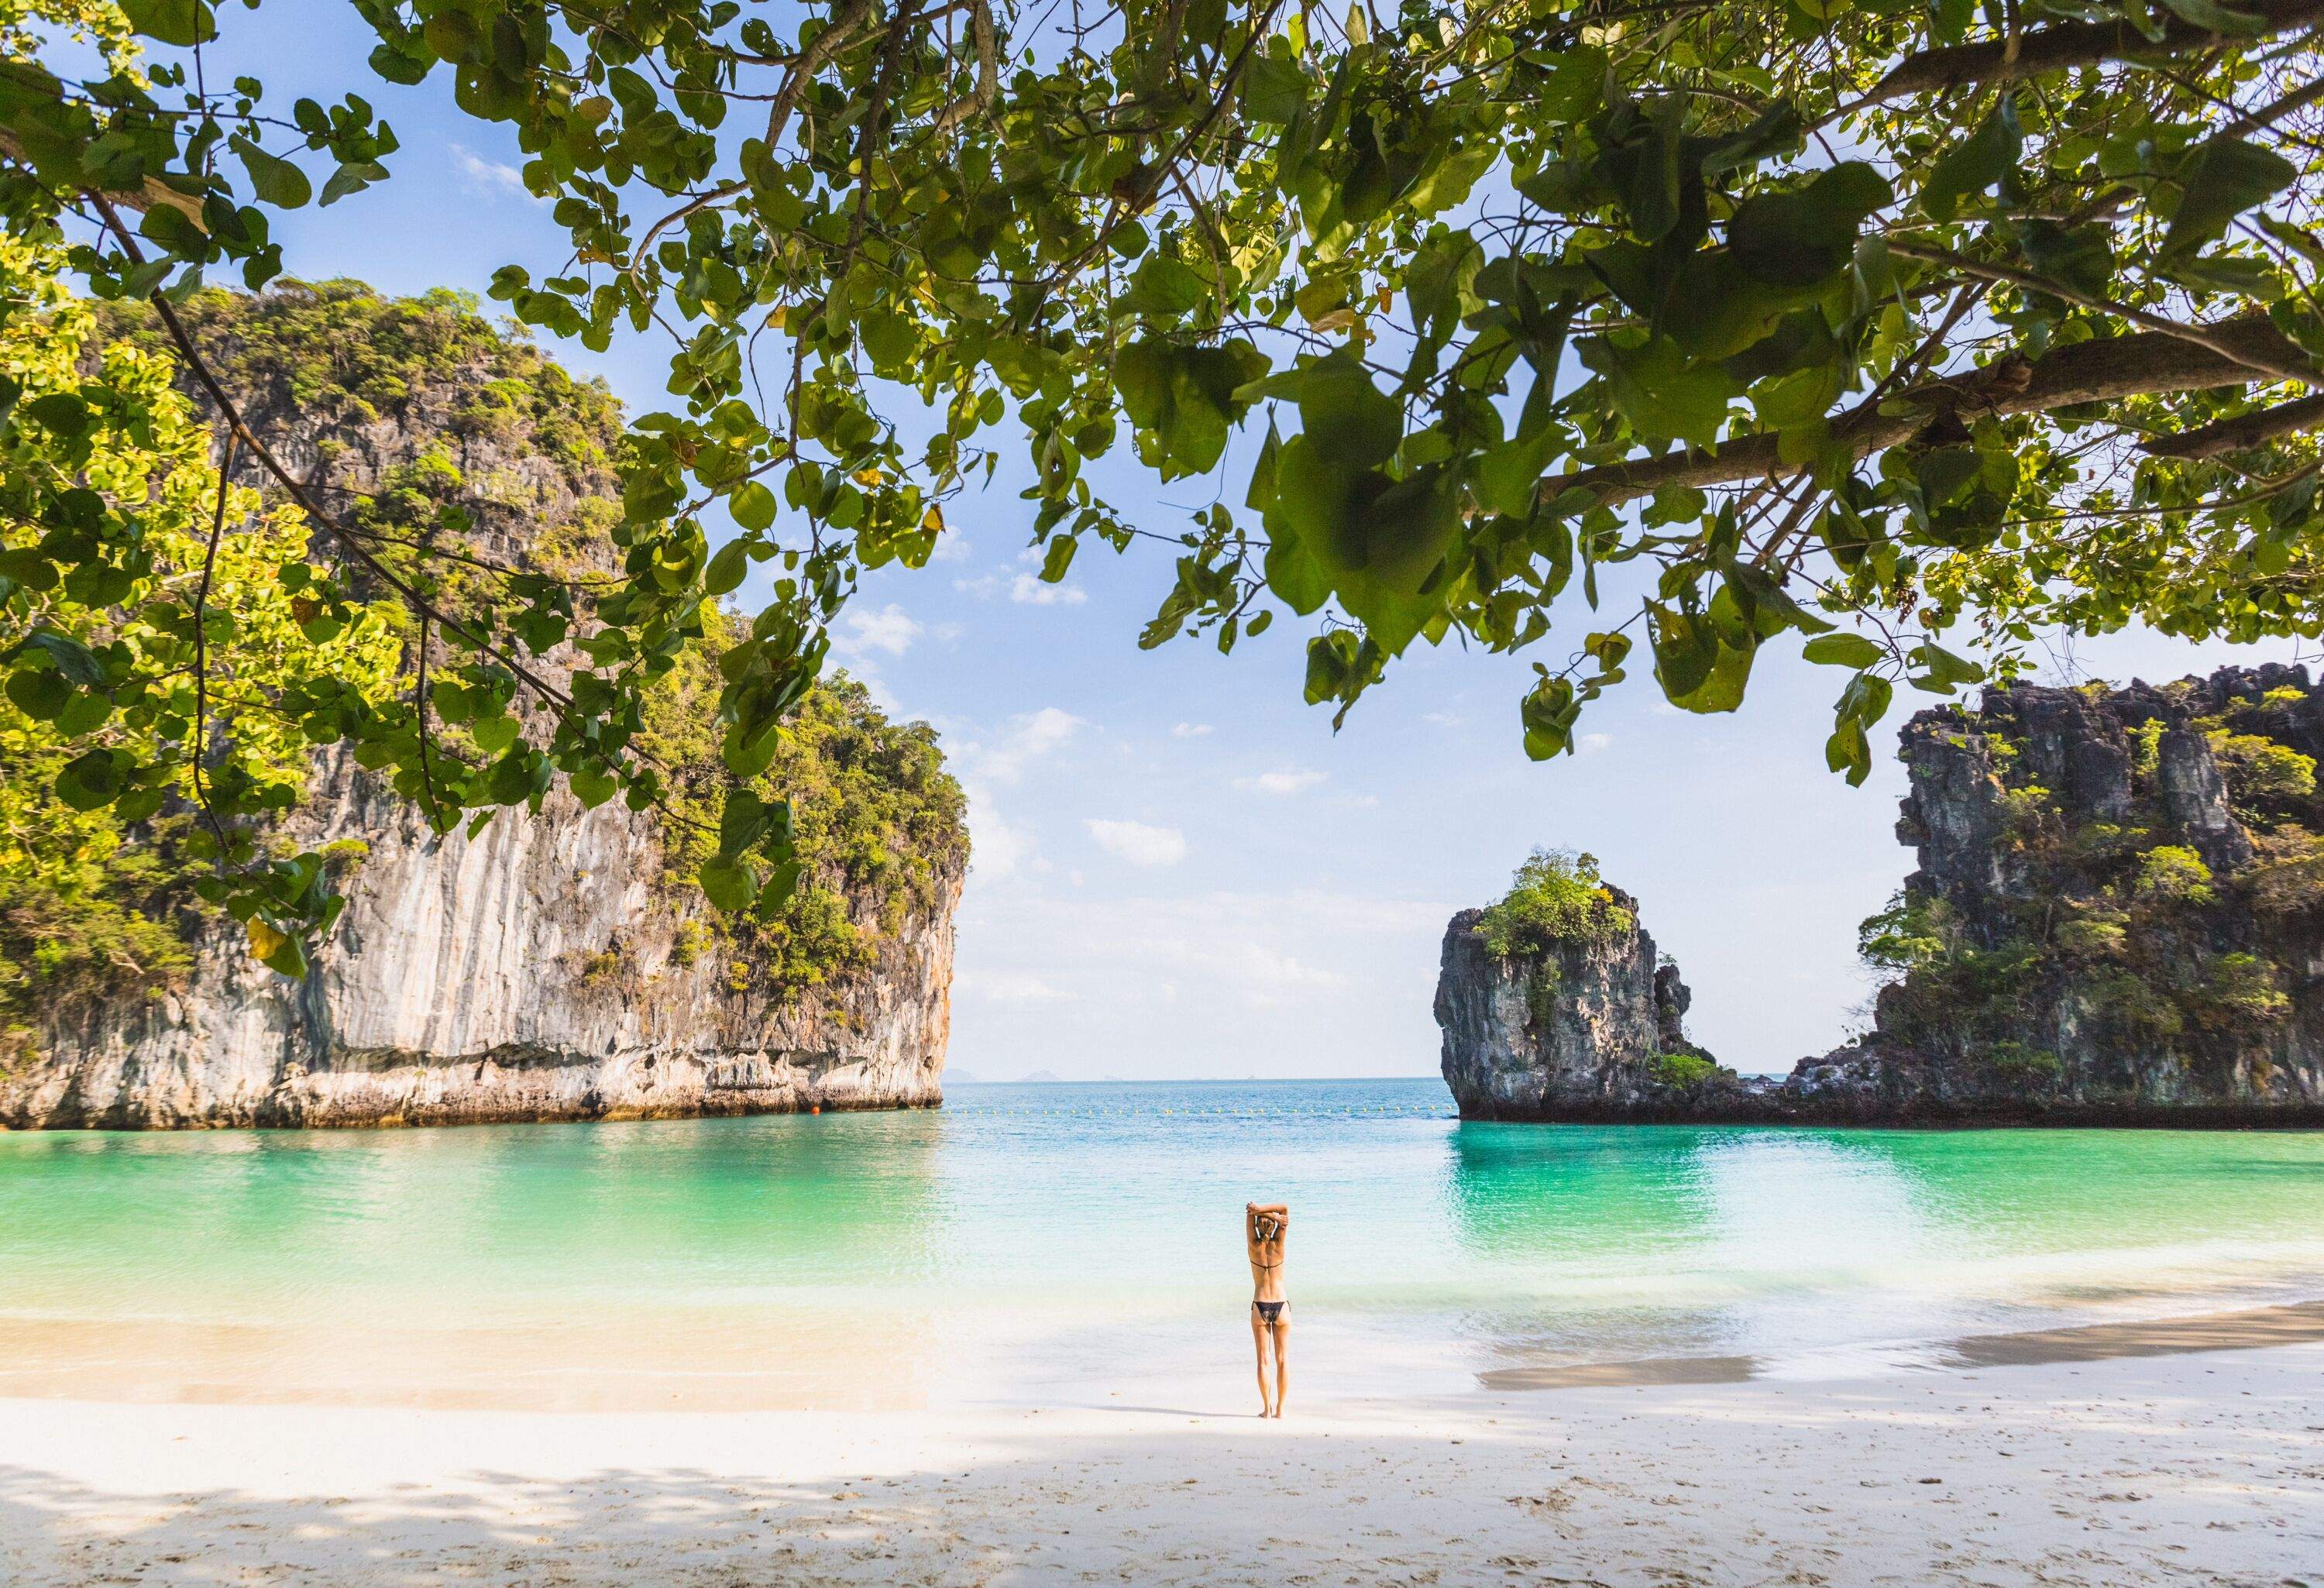 A woman basks in the beauty of a white sand beach on a picturesque island, with stunning rock formations nearby adding to the natural splendour.